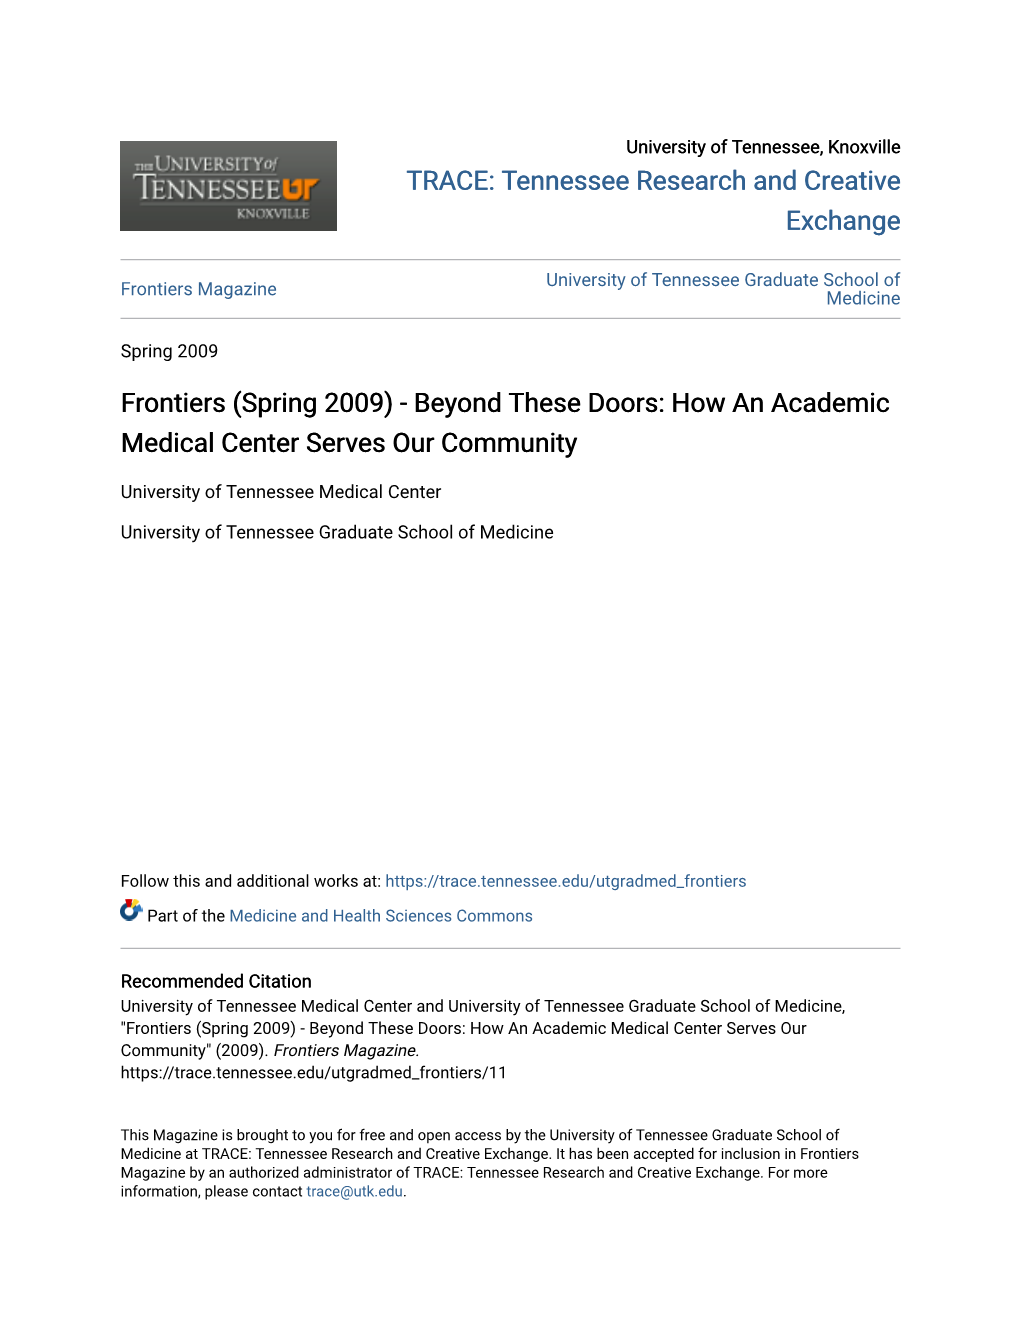 Frontiers (Spring 2009) - Beyond These Doors: How an Academic Medical Center Serves Our Community